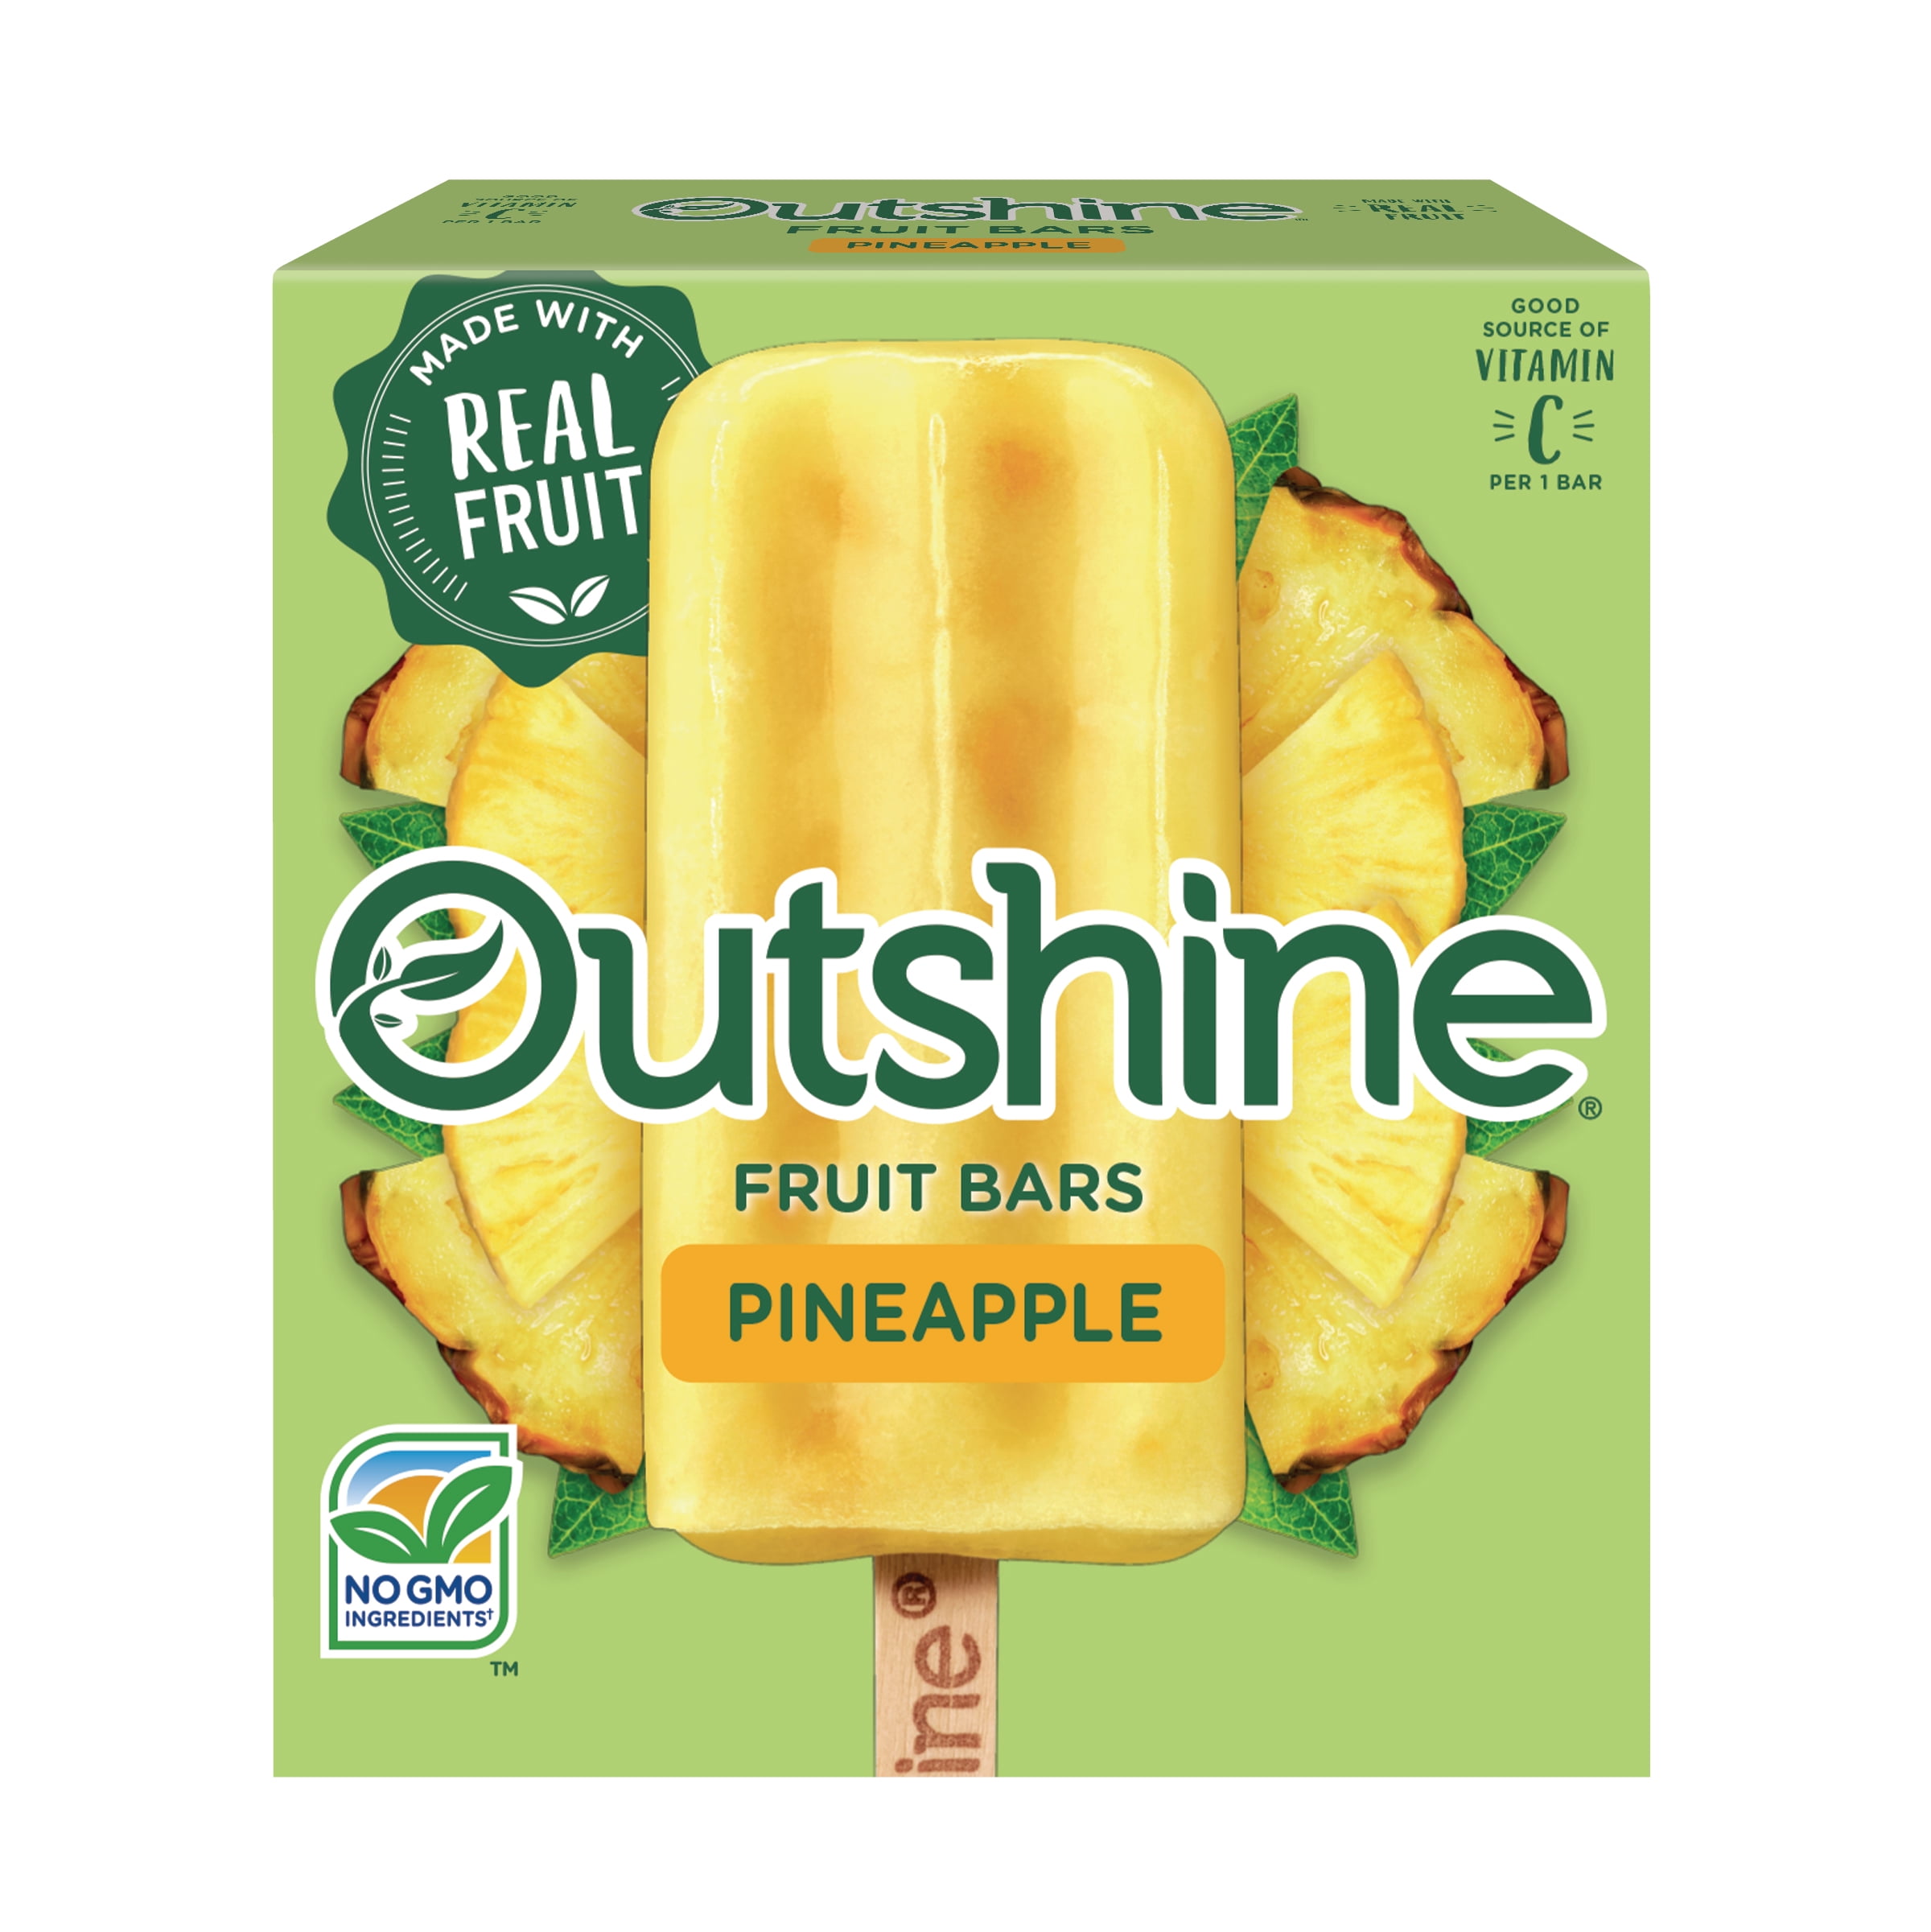 Outshine Pineapple Frozen Real Fruit Bars, 6 Ct